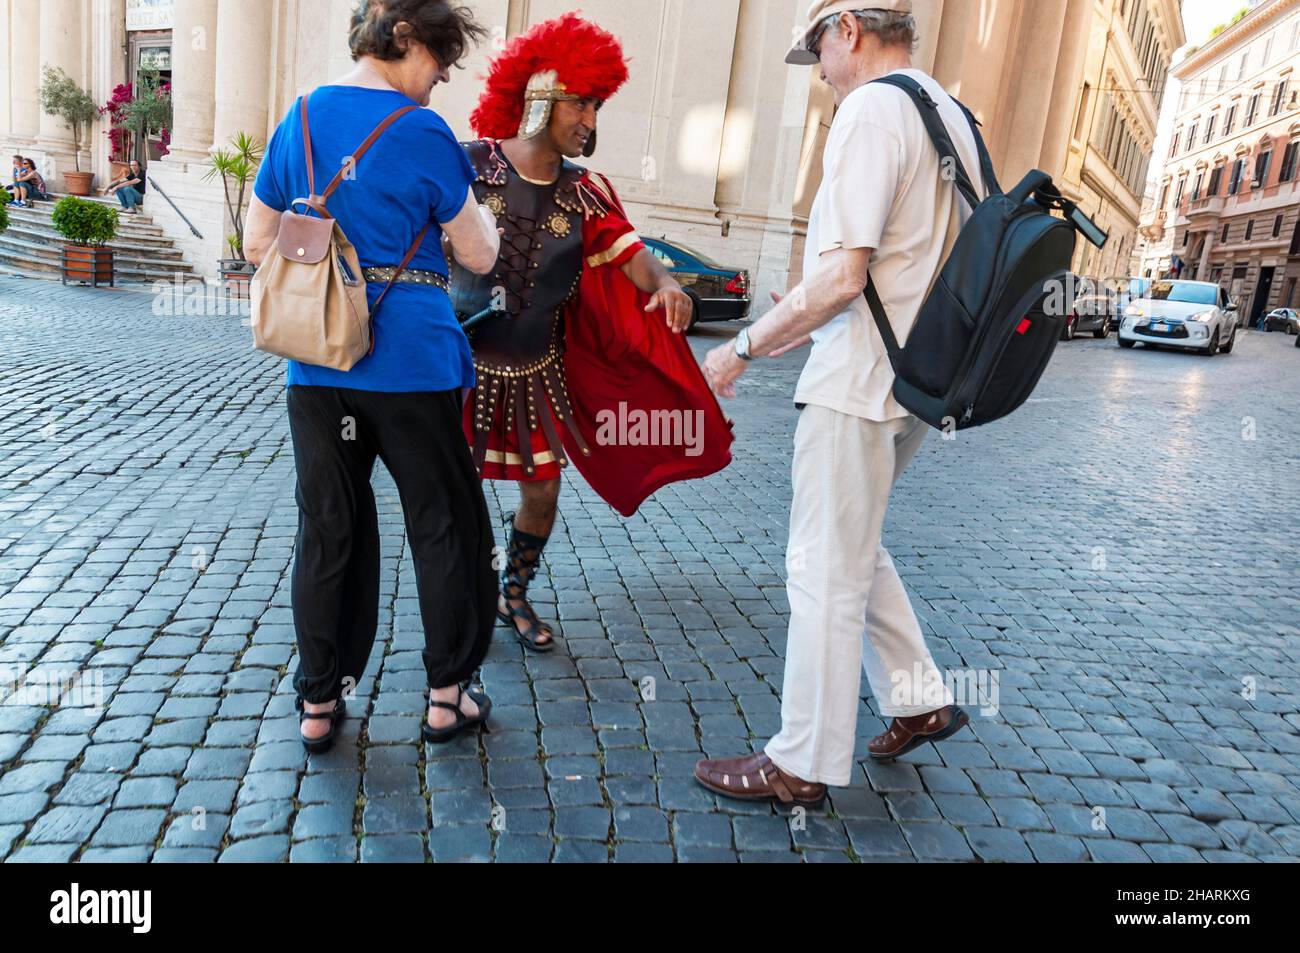 ROME, ITALYA - JUNE 2, 2014: Gladiator impersonator near Colosseum entertains tourists to take photos with them Stock Photo